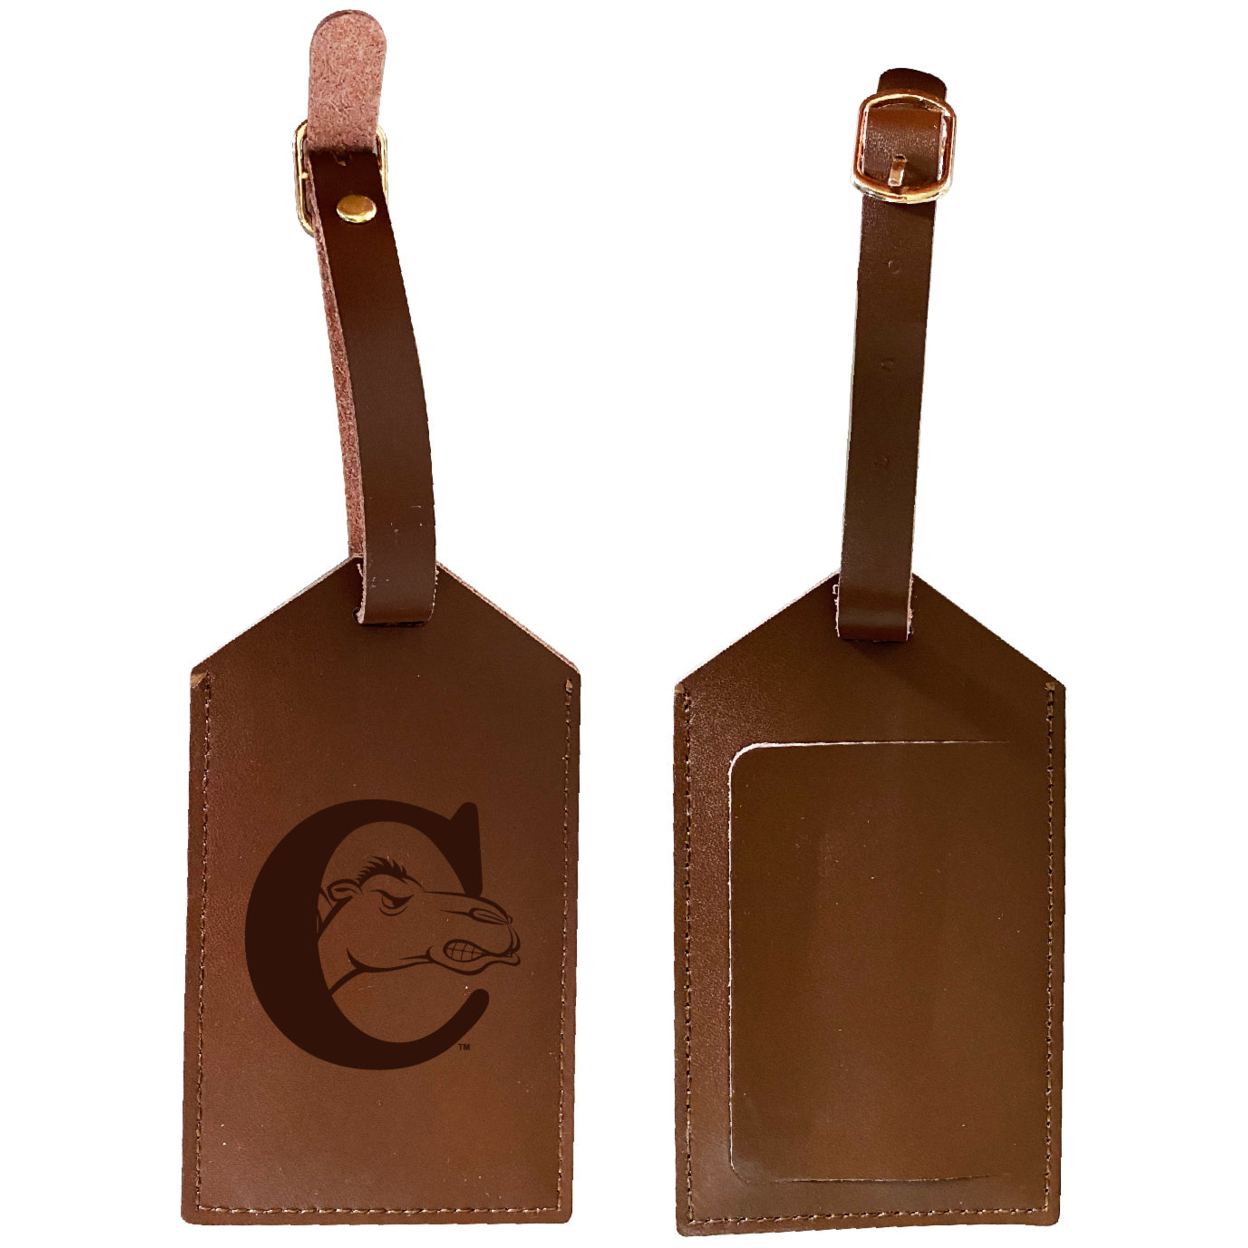 Campbell University Fighting Camels Leather Luggage Tag Engraved